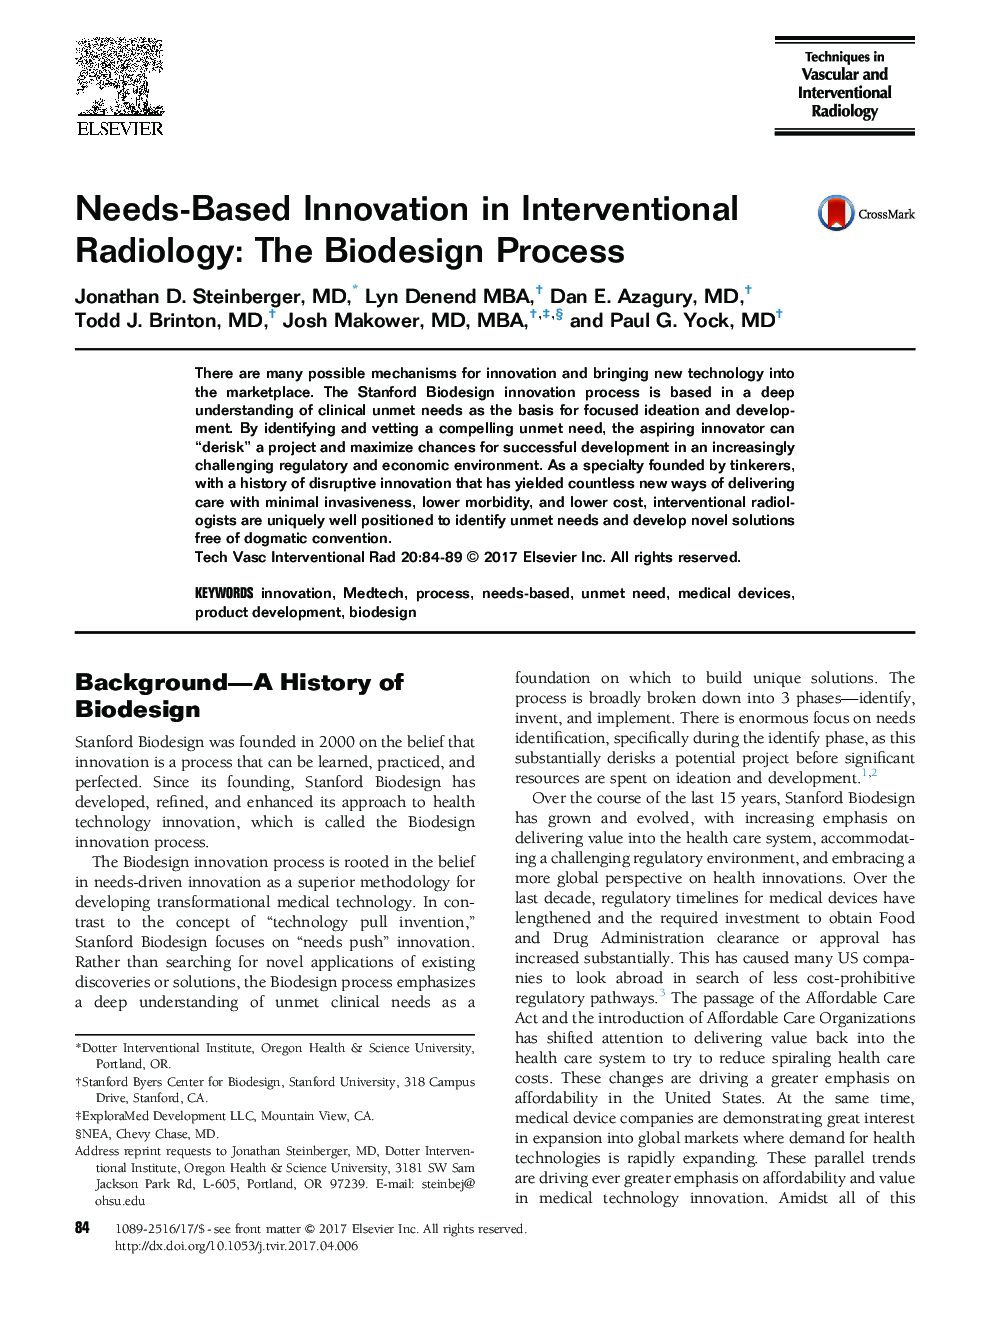 Needs-Based Innovation in Interventional Radiology: The Biodesign Process